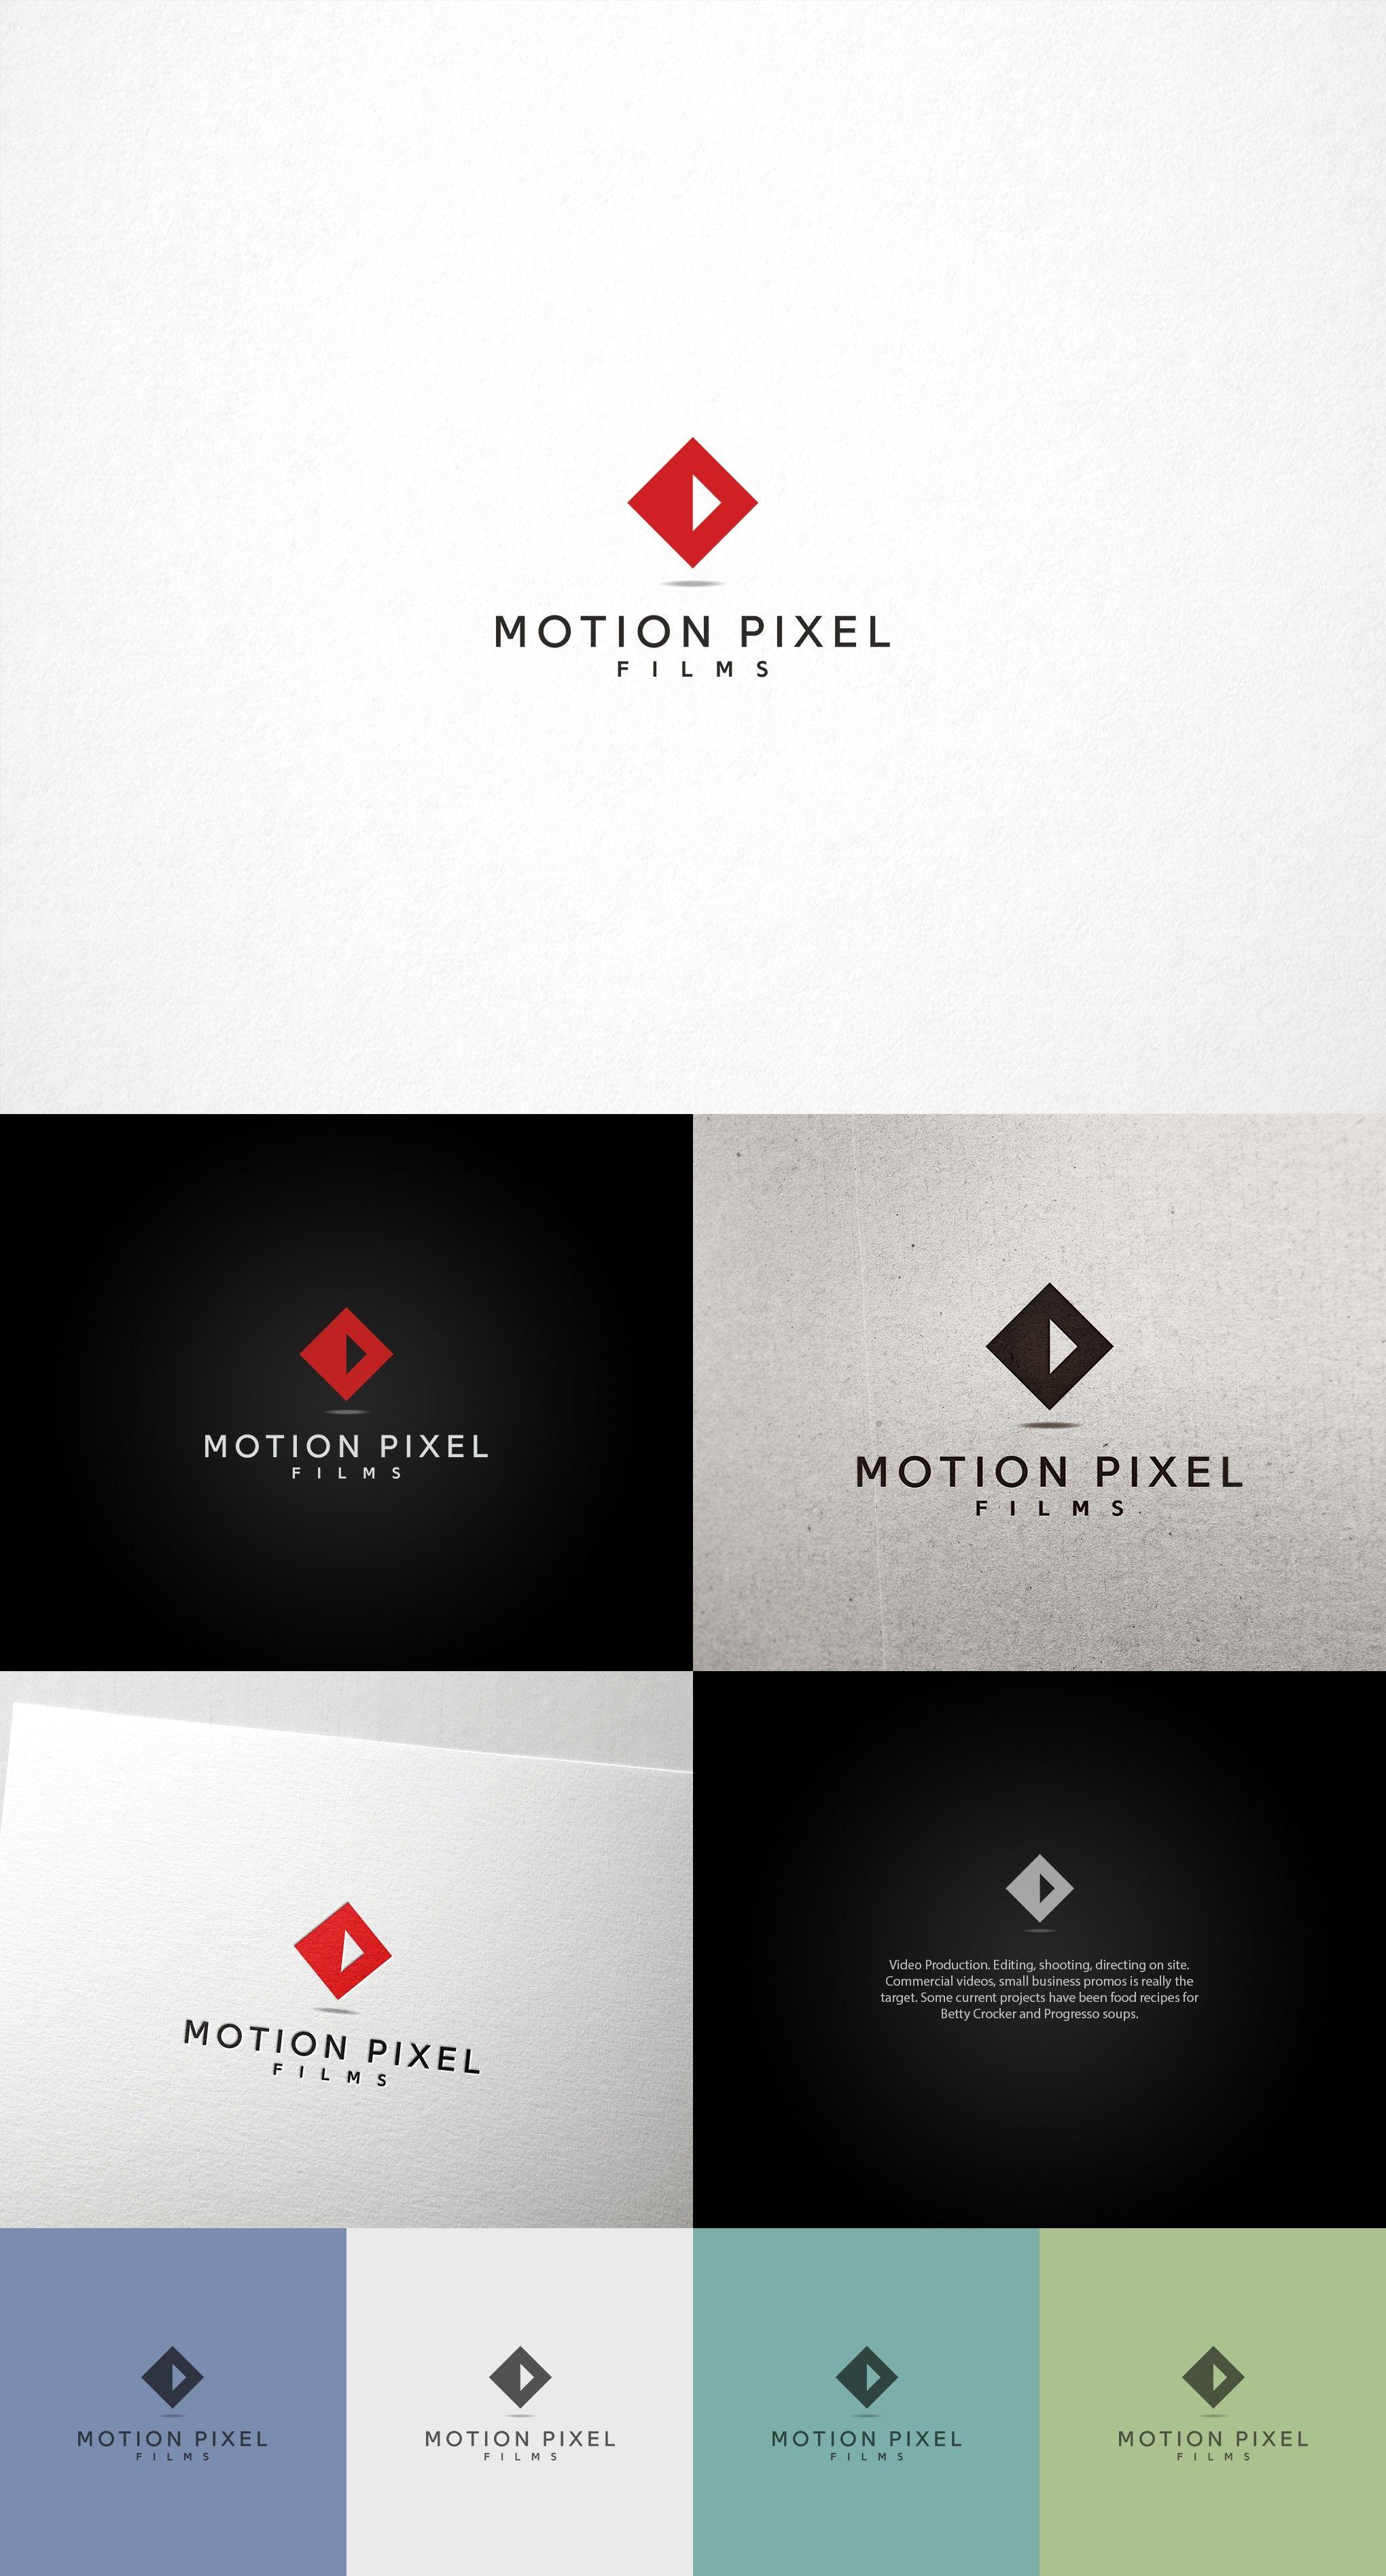 Small Sharp Logo - Modern, simple and sharp logo for Motion Pixel Films | 99designs ...